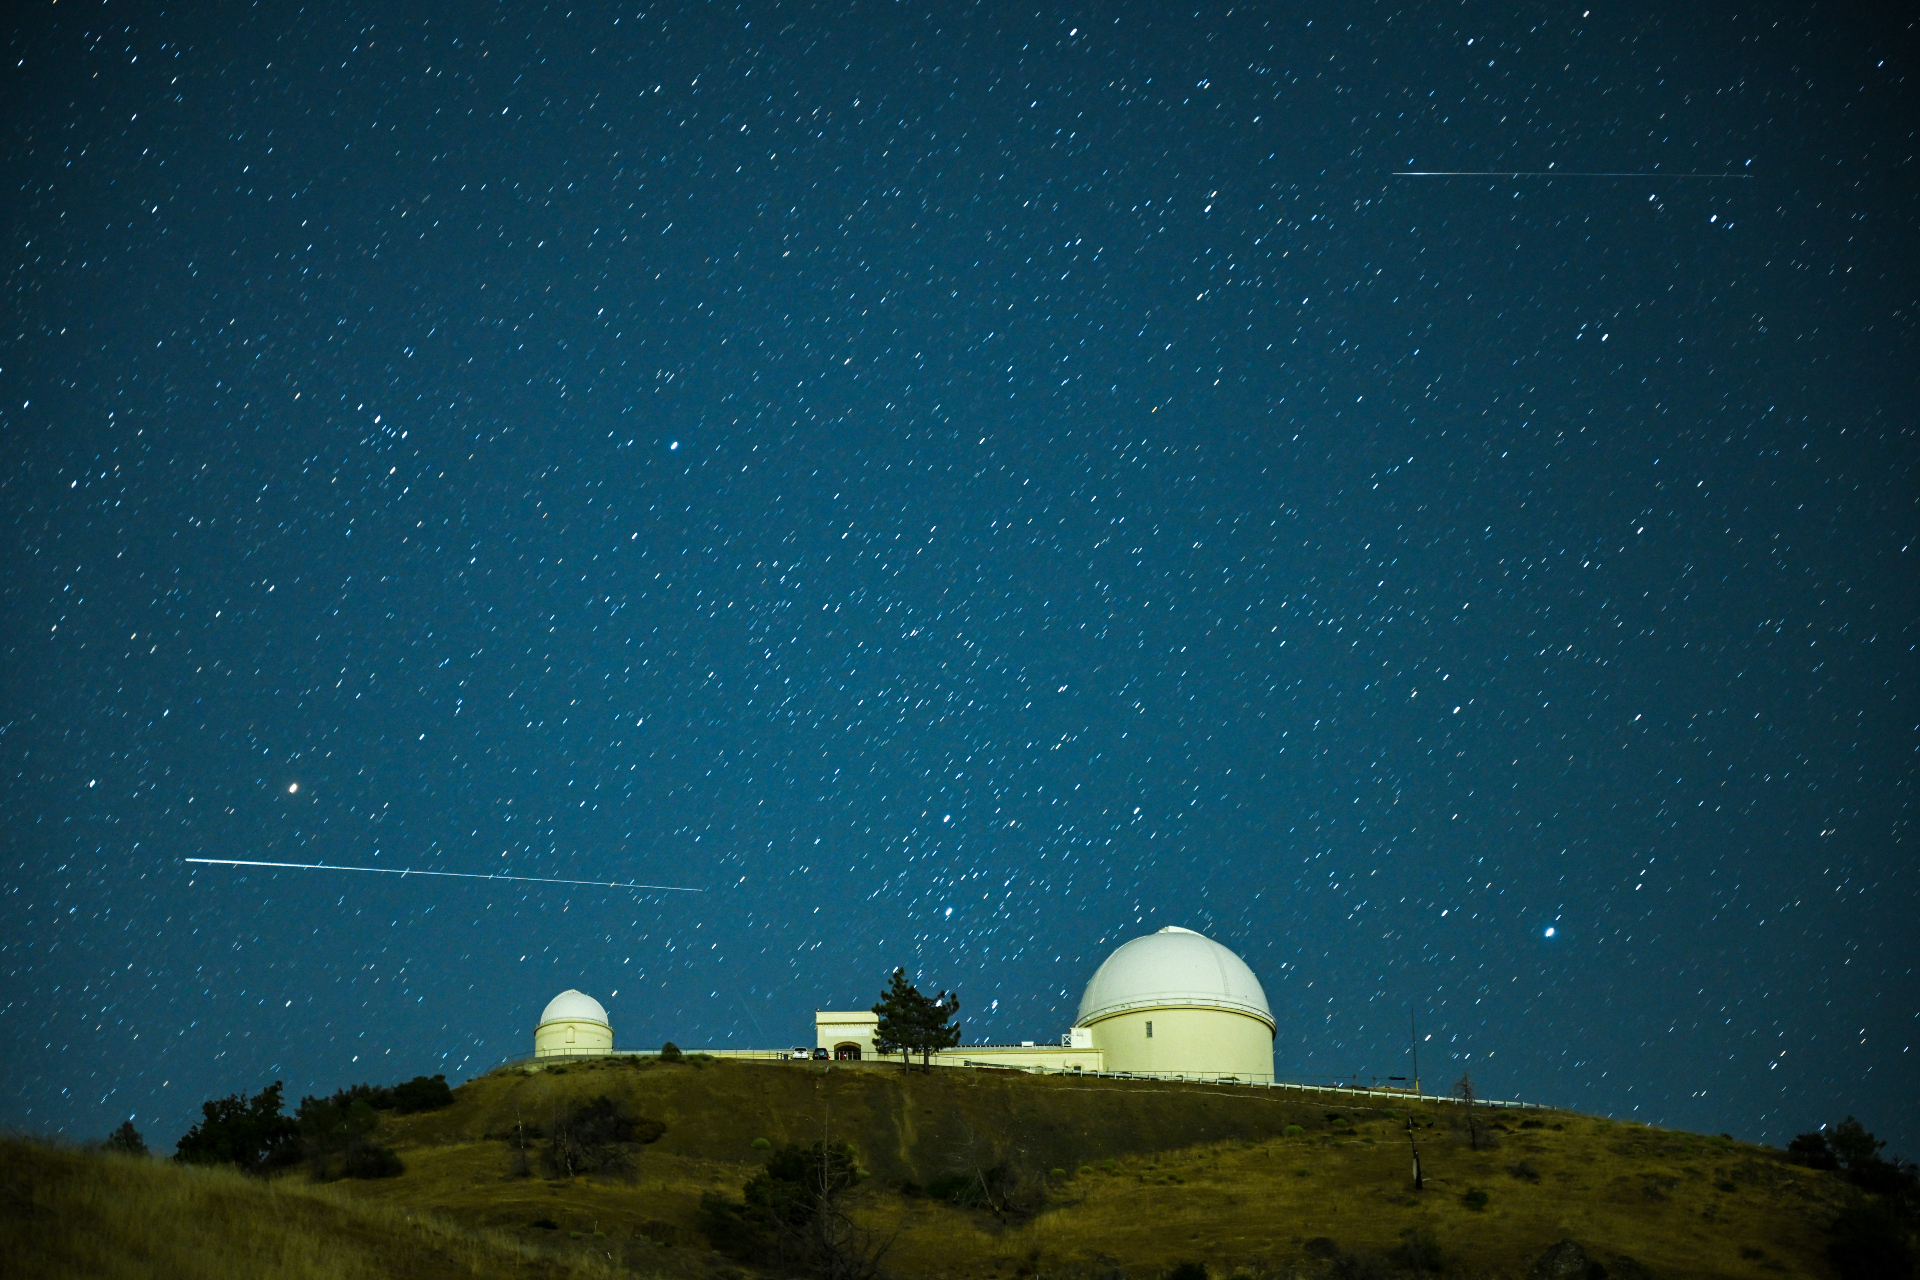 A long white train from the Perseid meteorite runs over Lick Observatory's dome structure in a horizontal orientation against the starry sky.